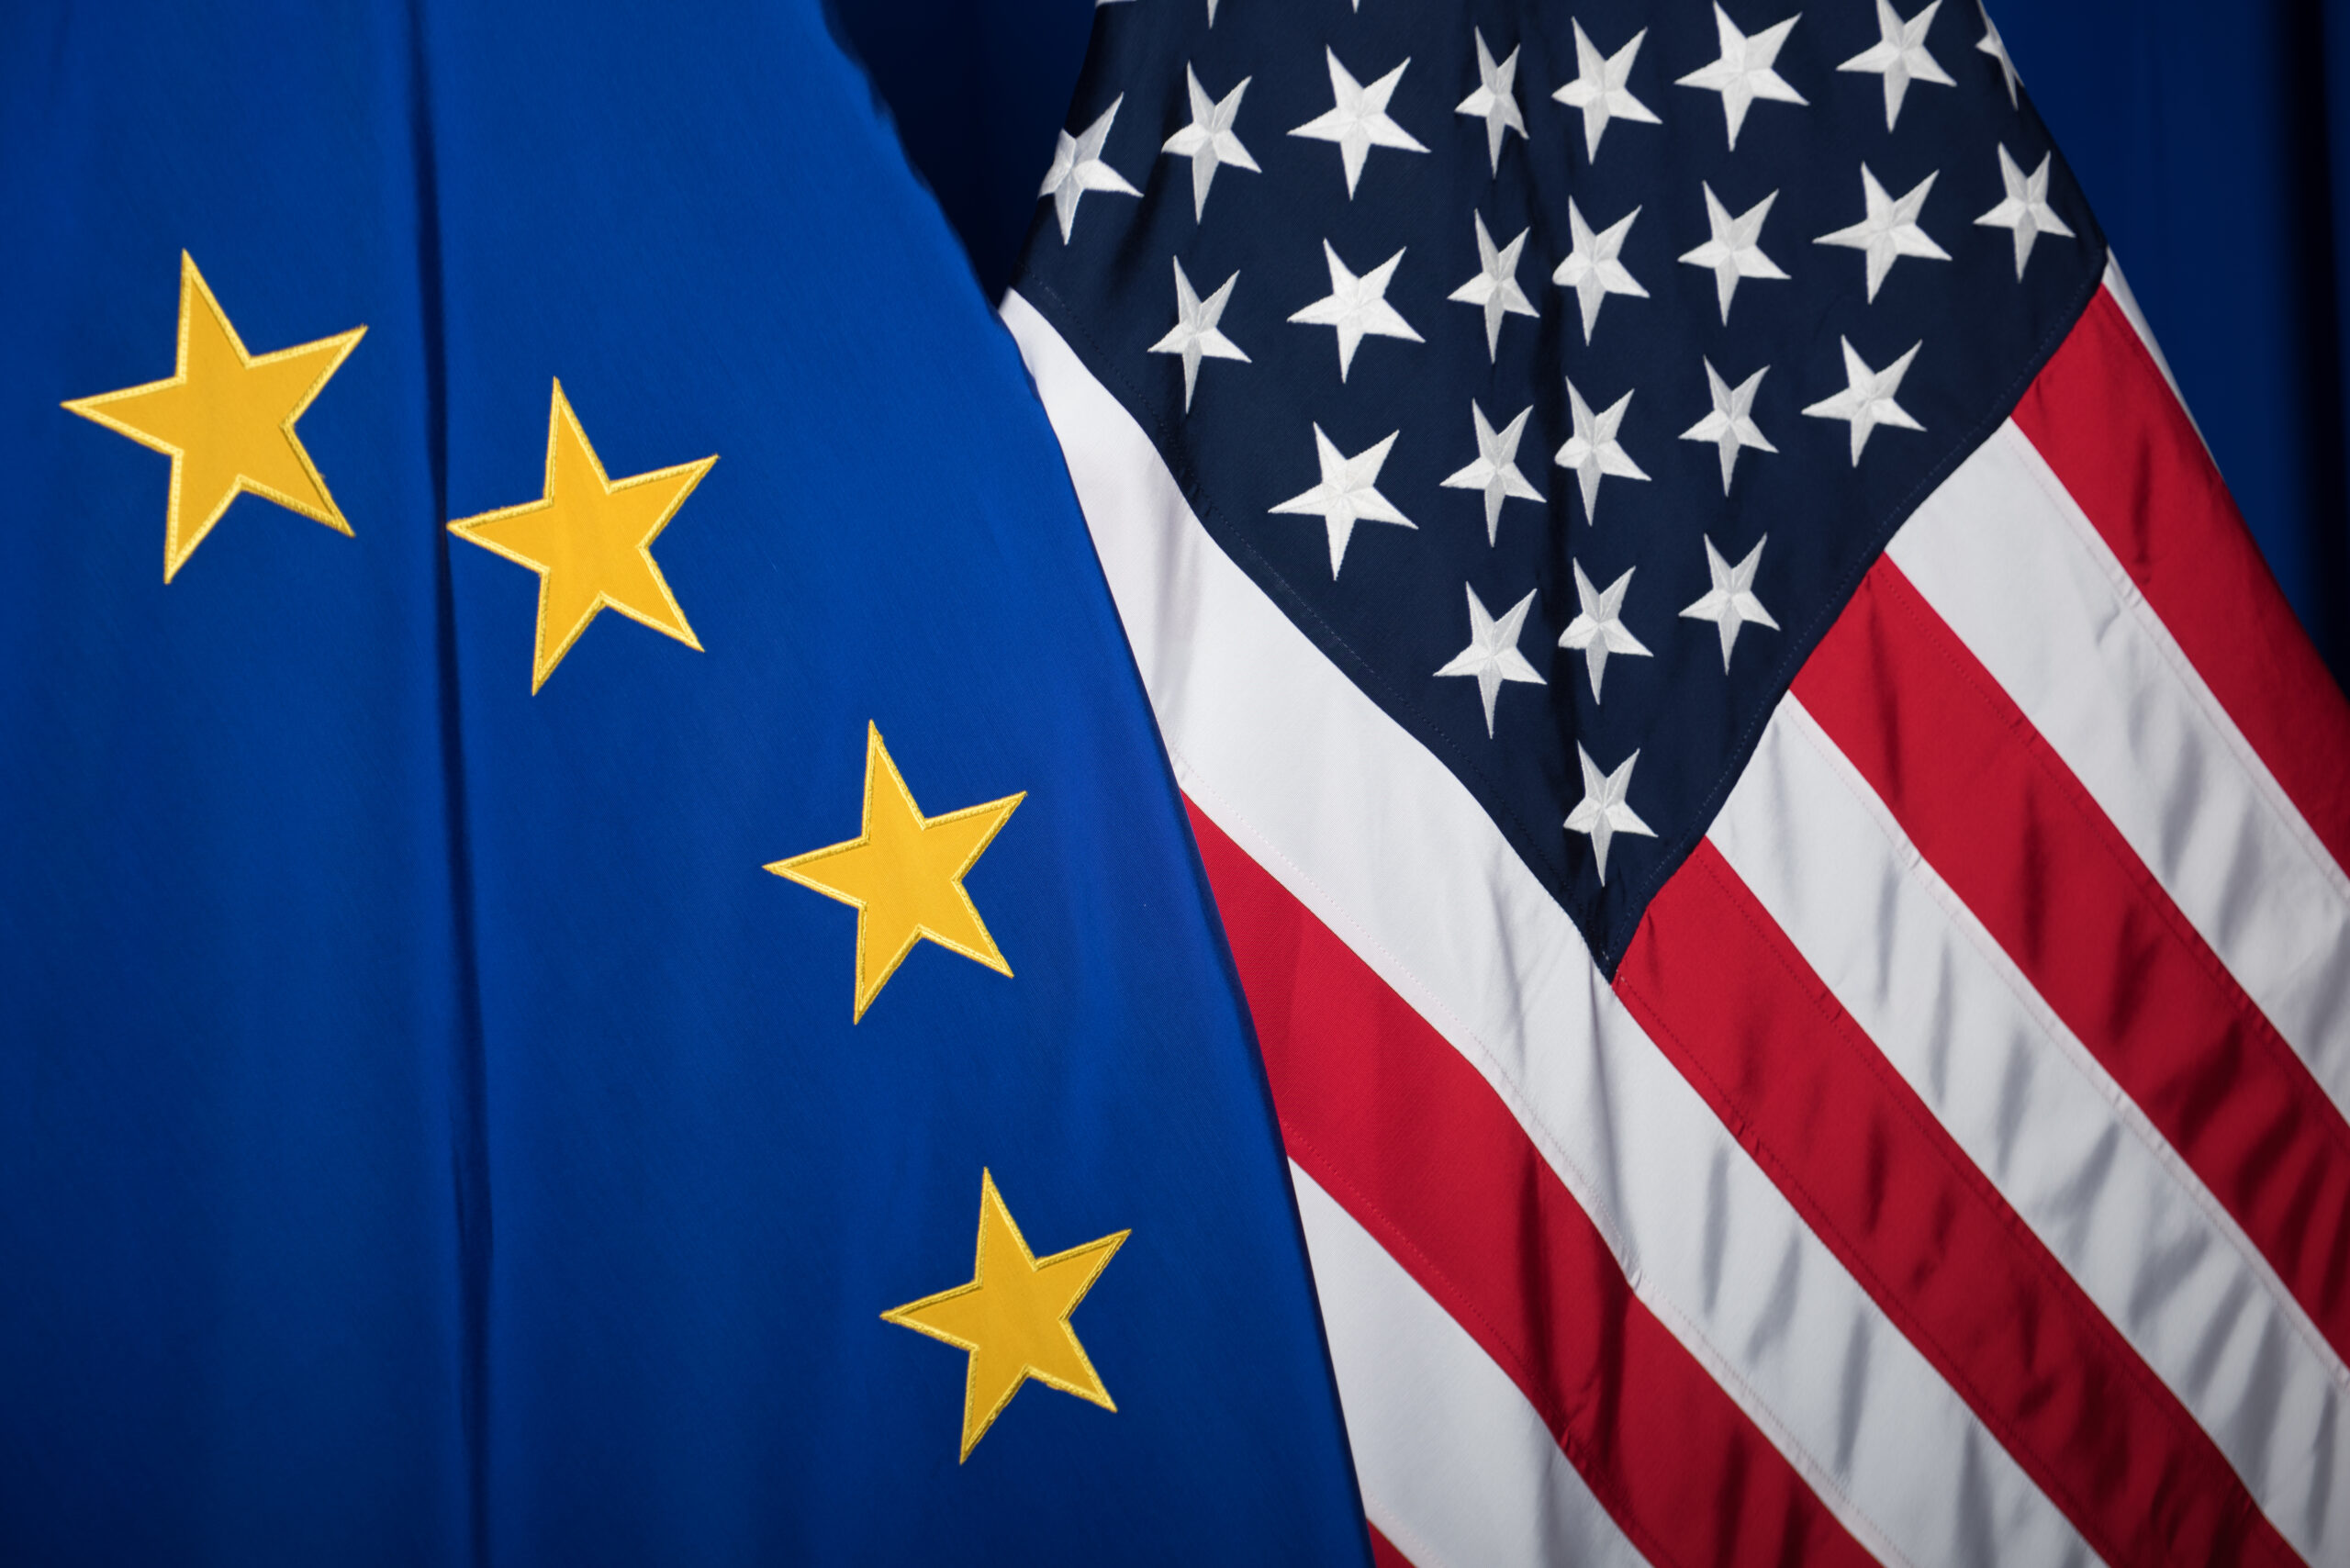 The national flag of the United States next to the European flag